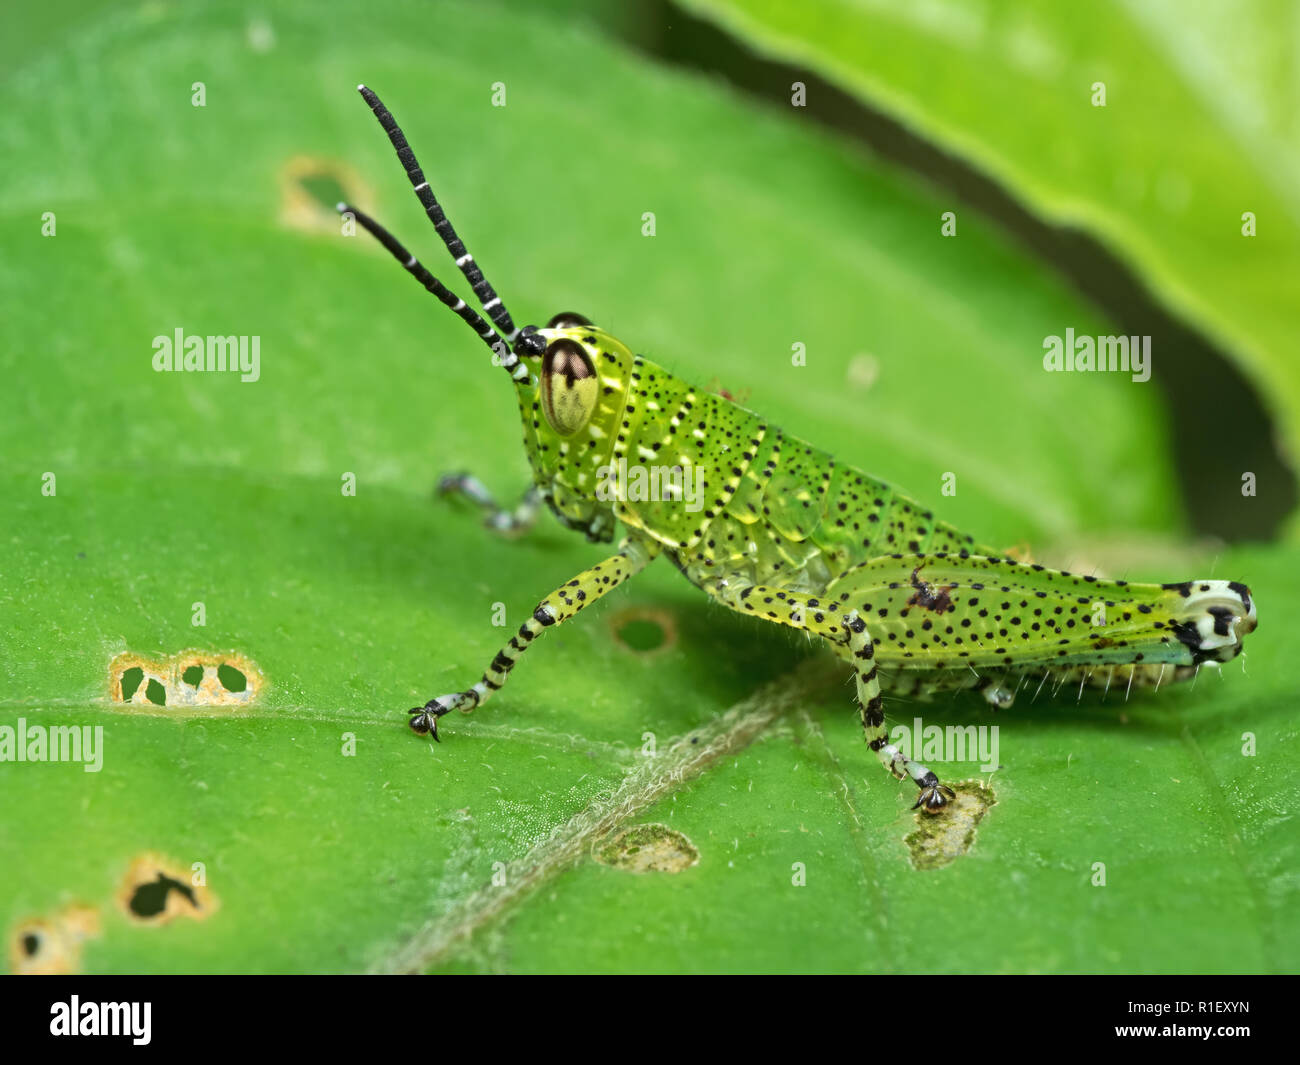 Macro Photography of Spotted Grasshopper on Green Leaf Stock Photo